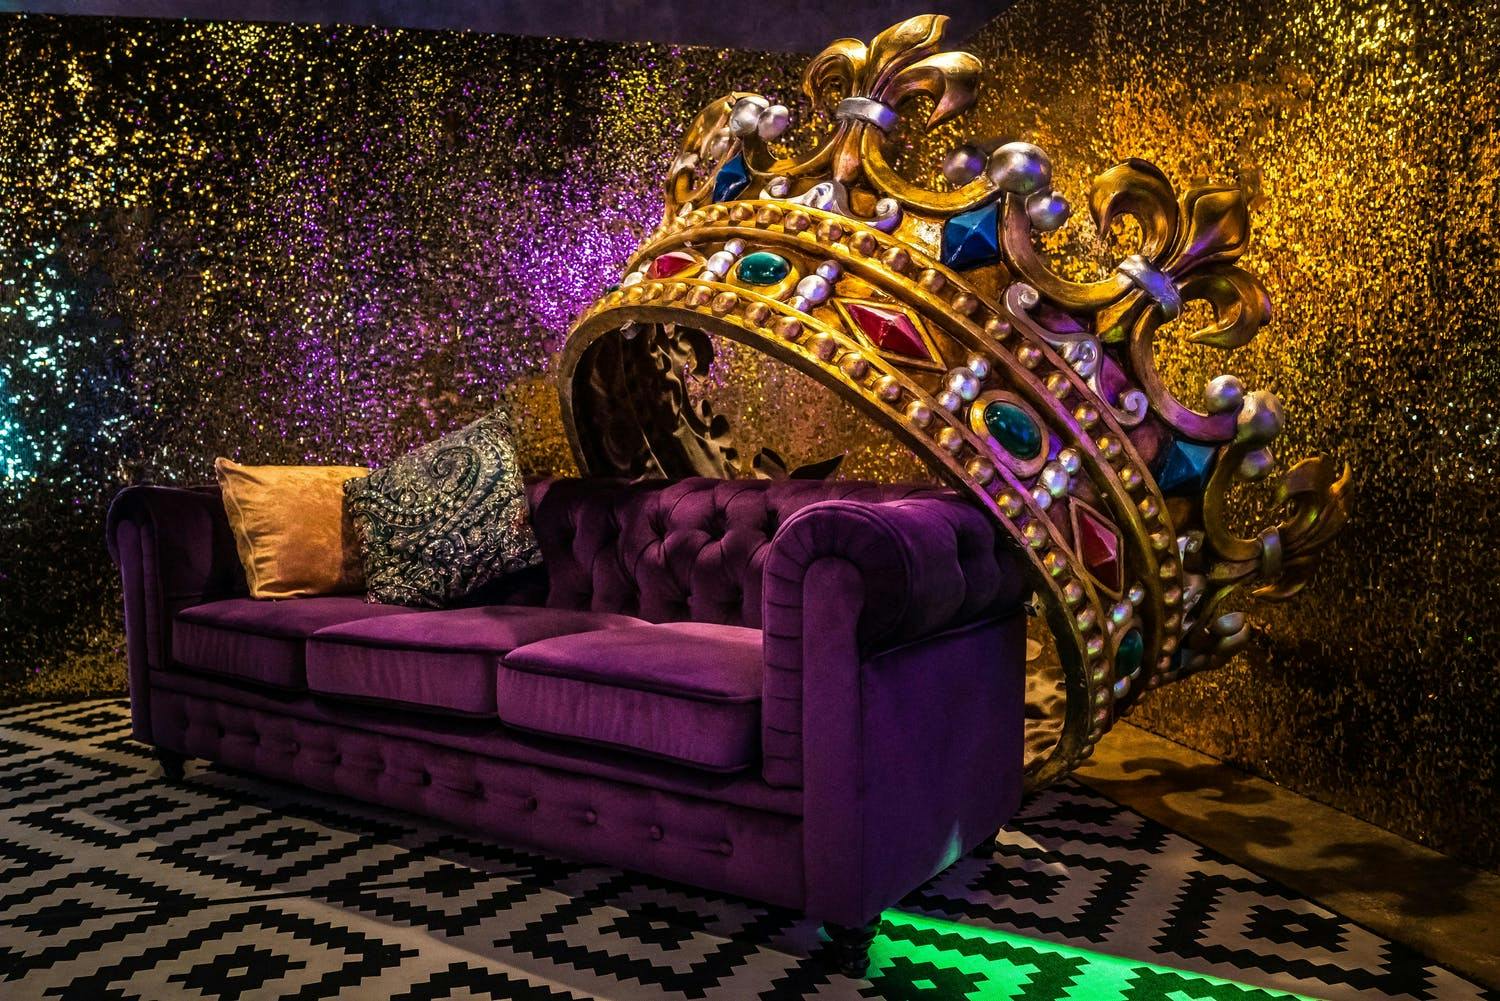 Purple couch with giant crown for Mardi gras party photo op | PartySlate